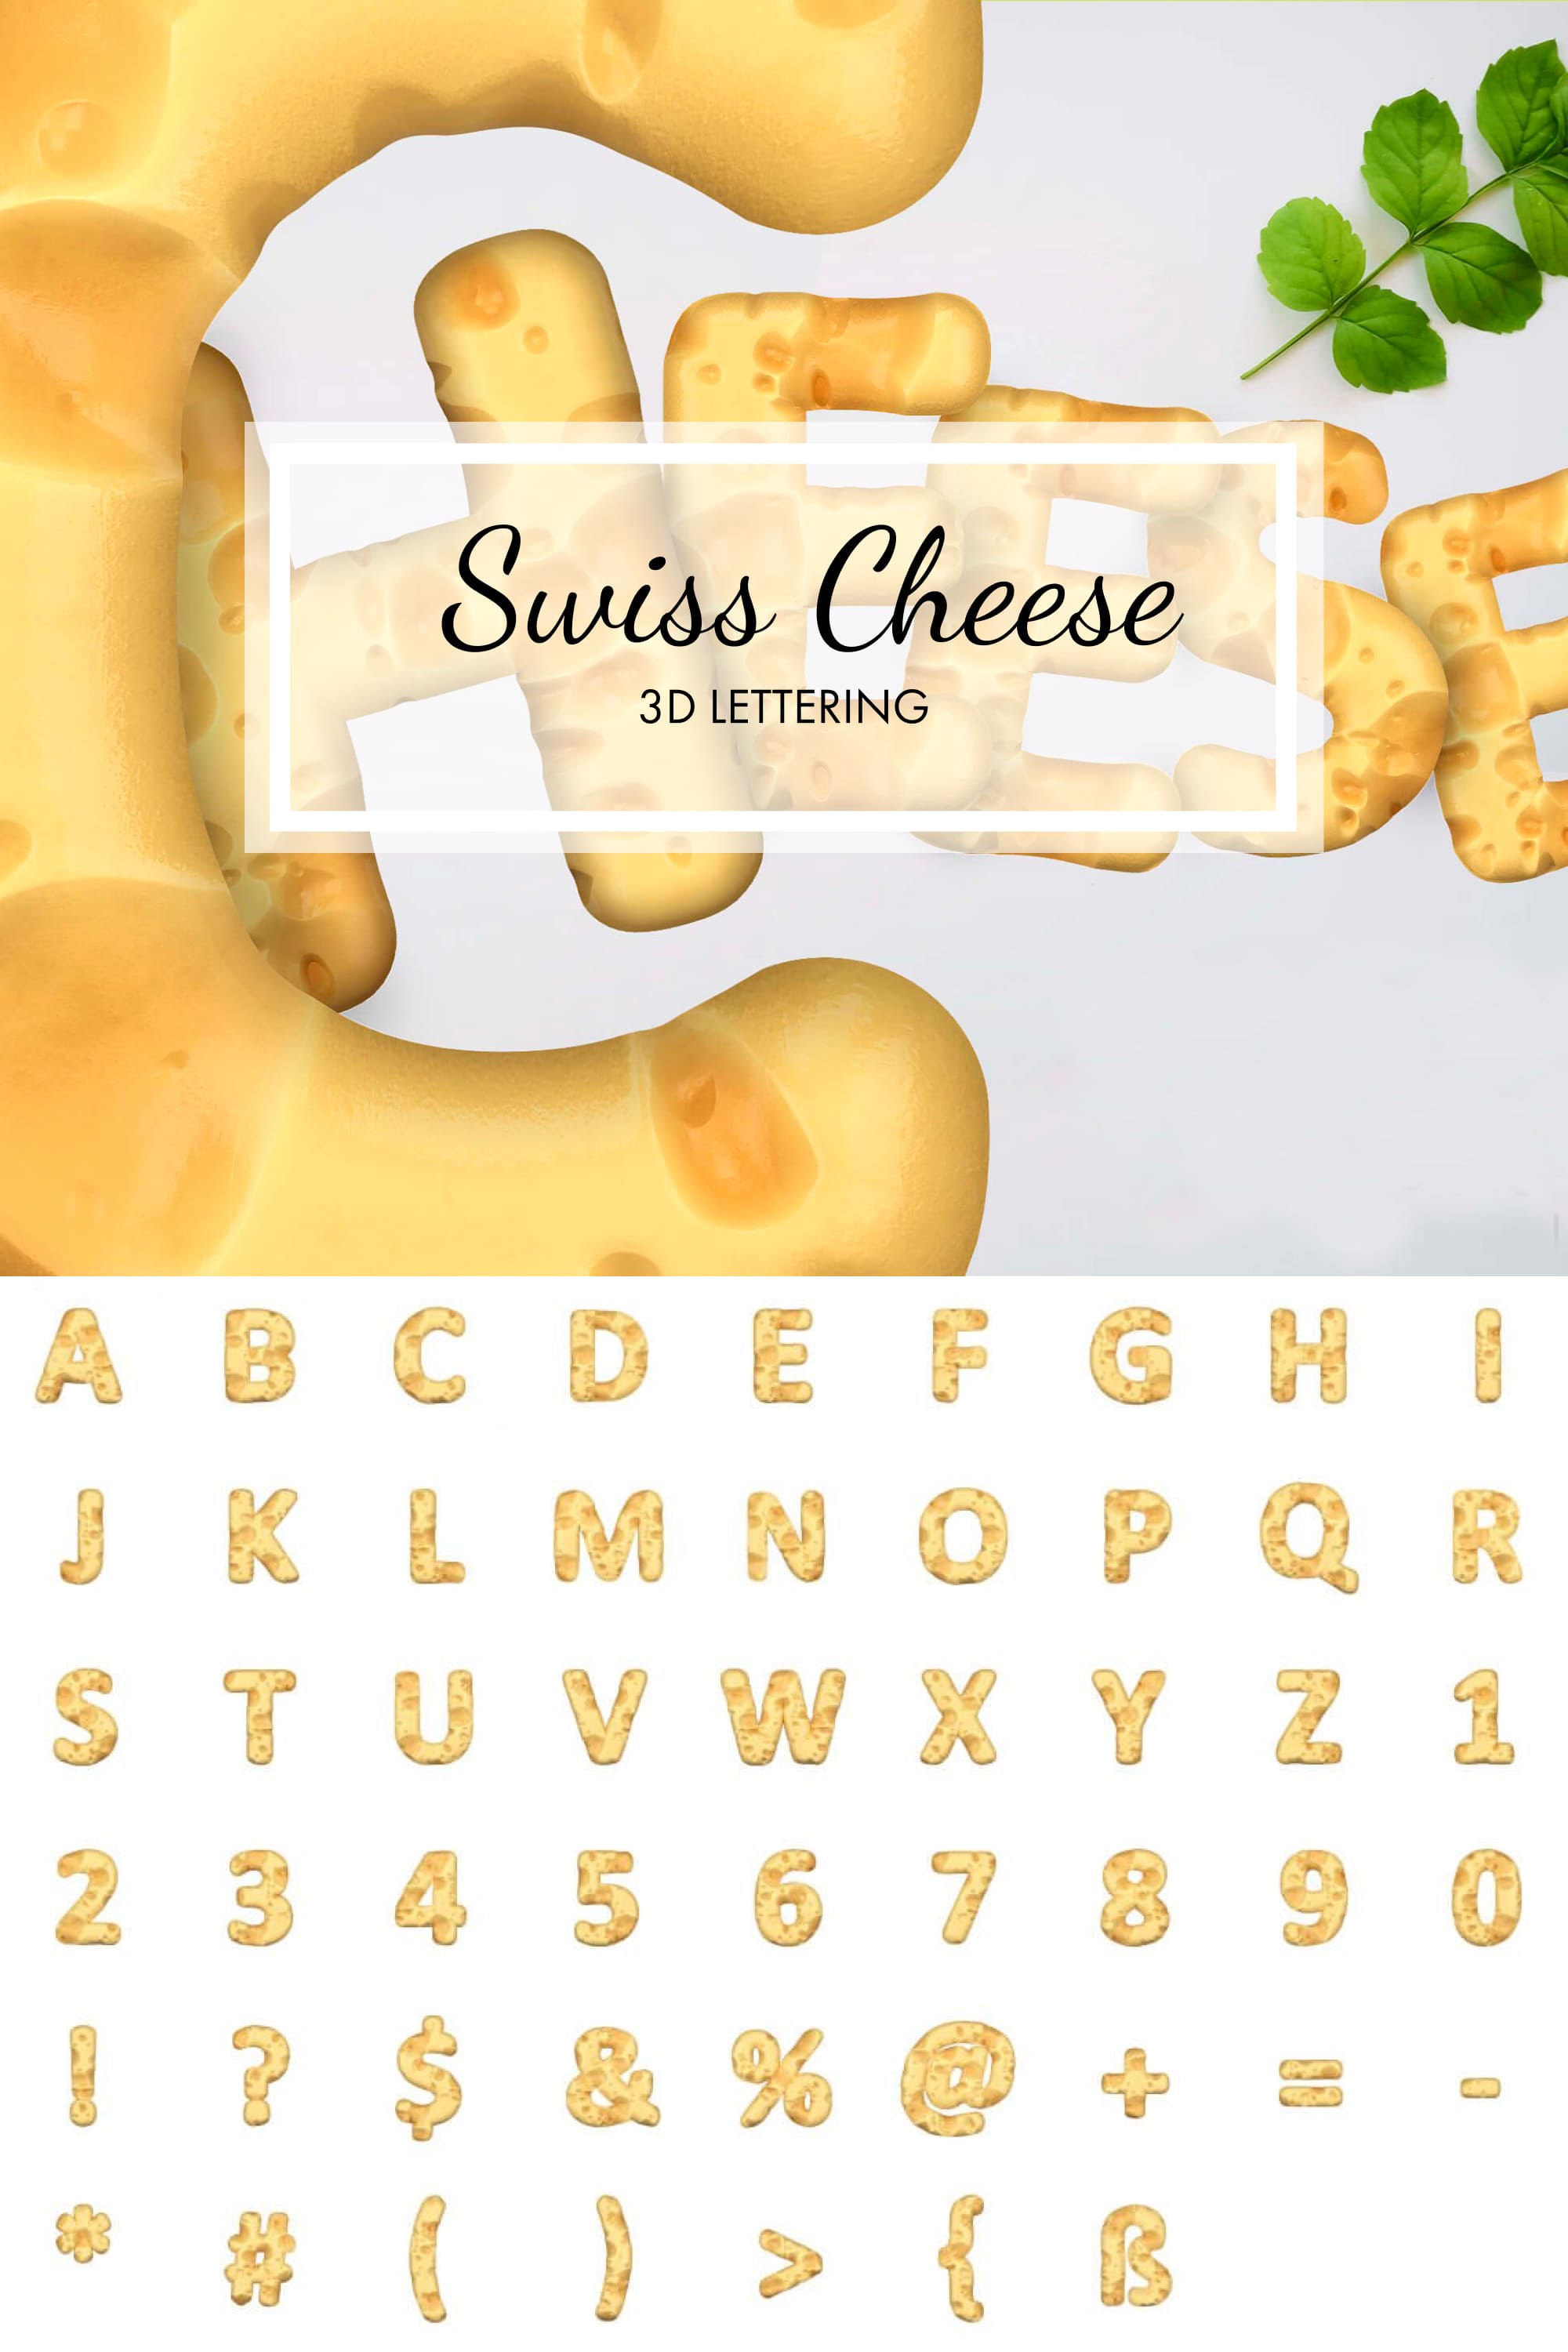 Gorgeous image of 3D lettering and alphabet in the style of hard cheese cheese.